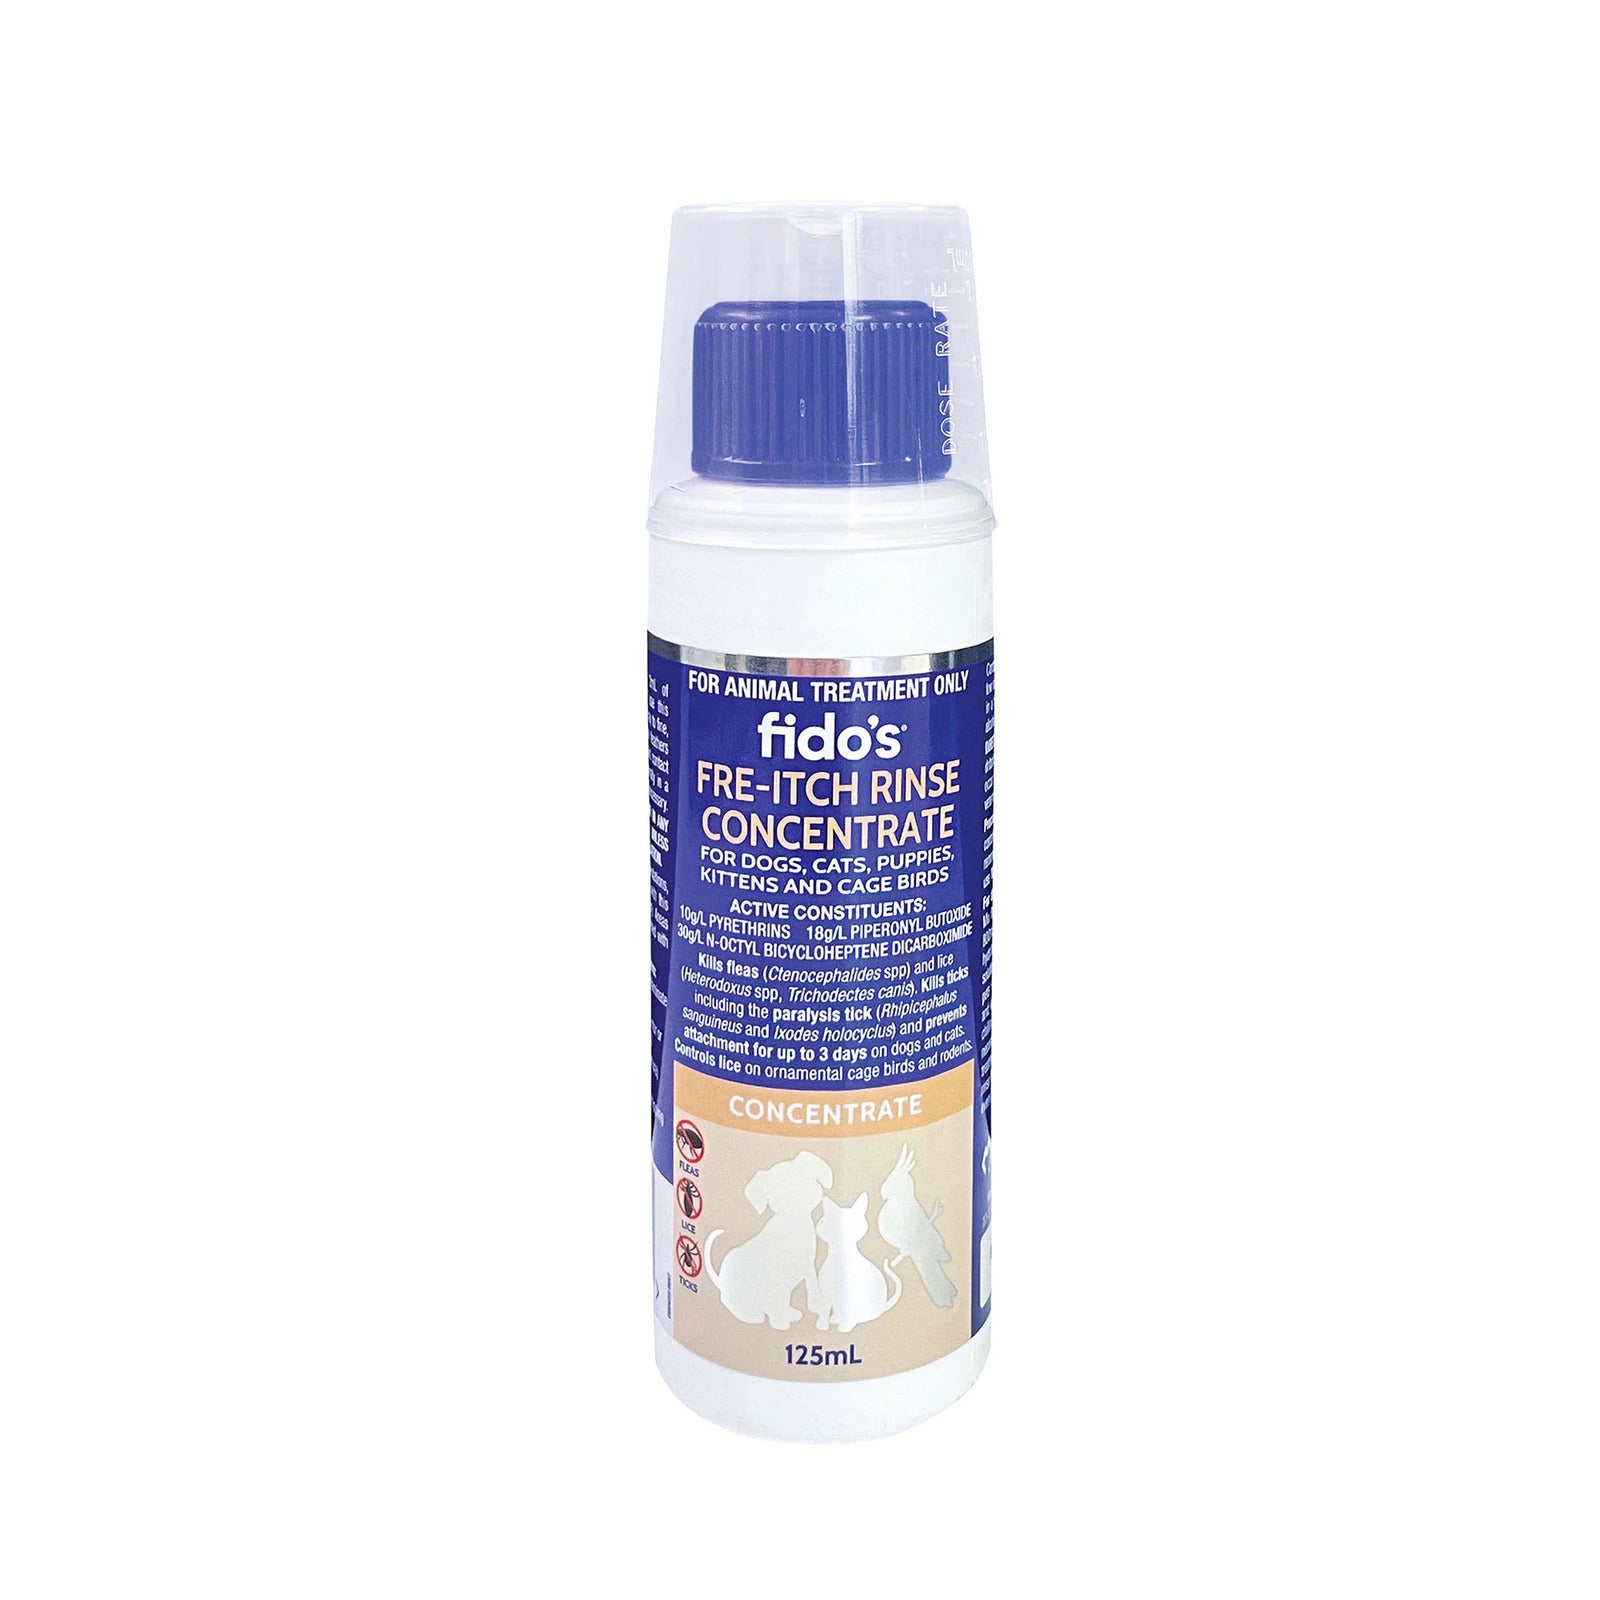 Fido's Fre-Itch Rinse Concentrate 125ml for Dogs, Cats, Puppies, Kittens & Birds